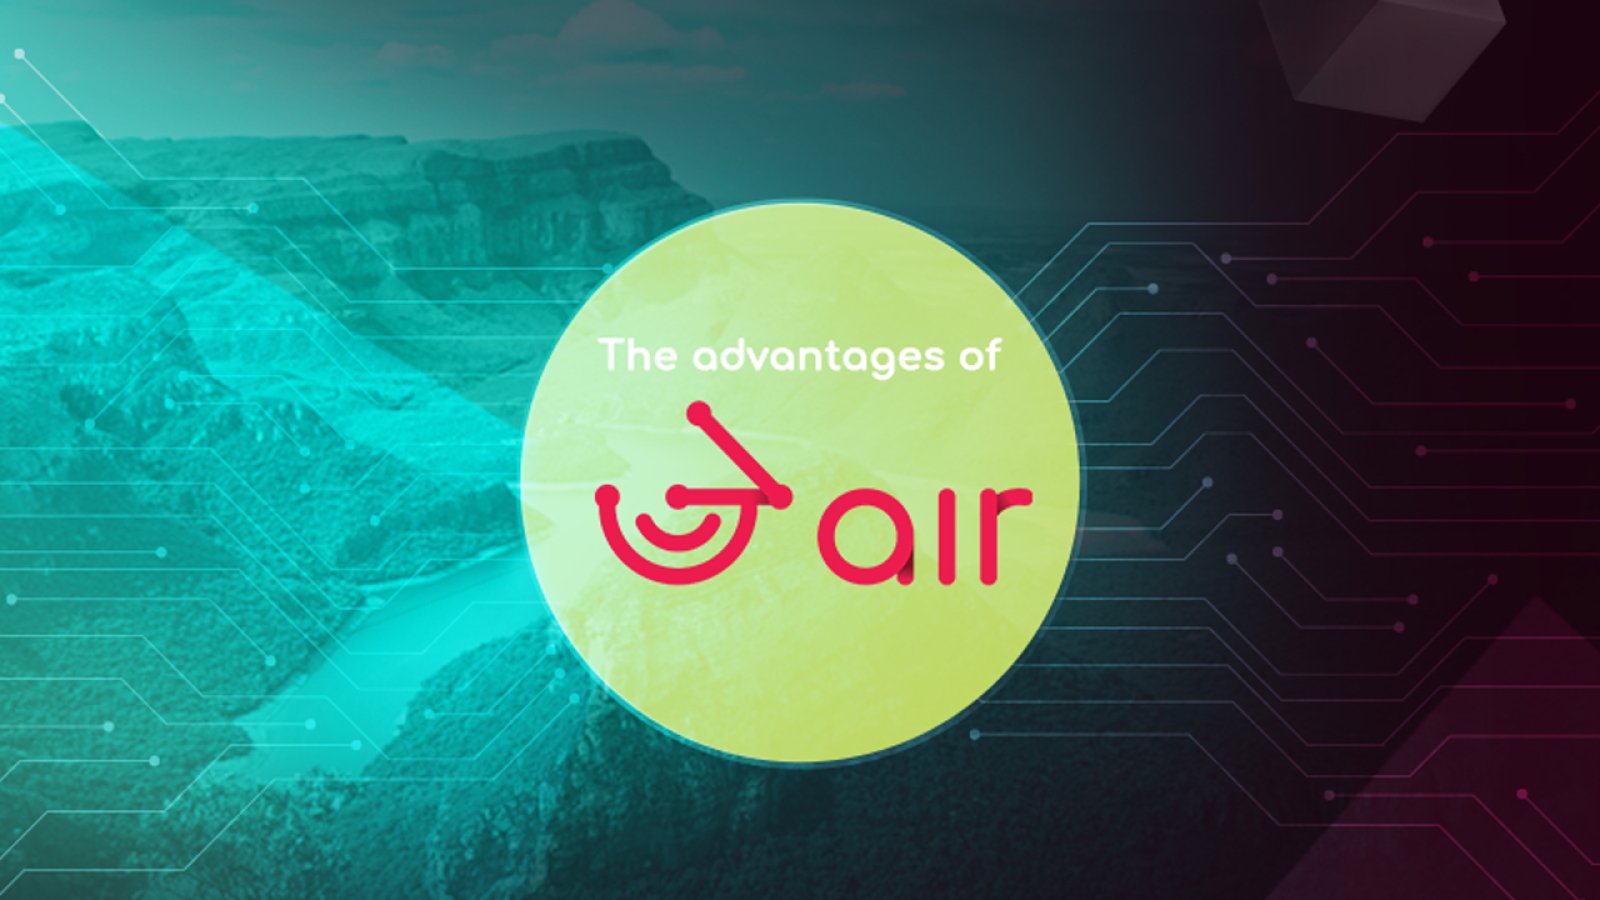 The Advantages of 3air’s Blockchain and Connectivity Platform for African Communities